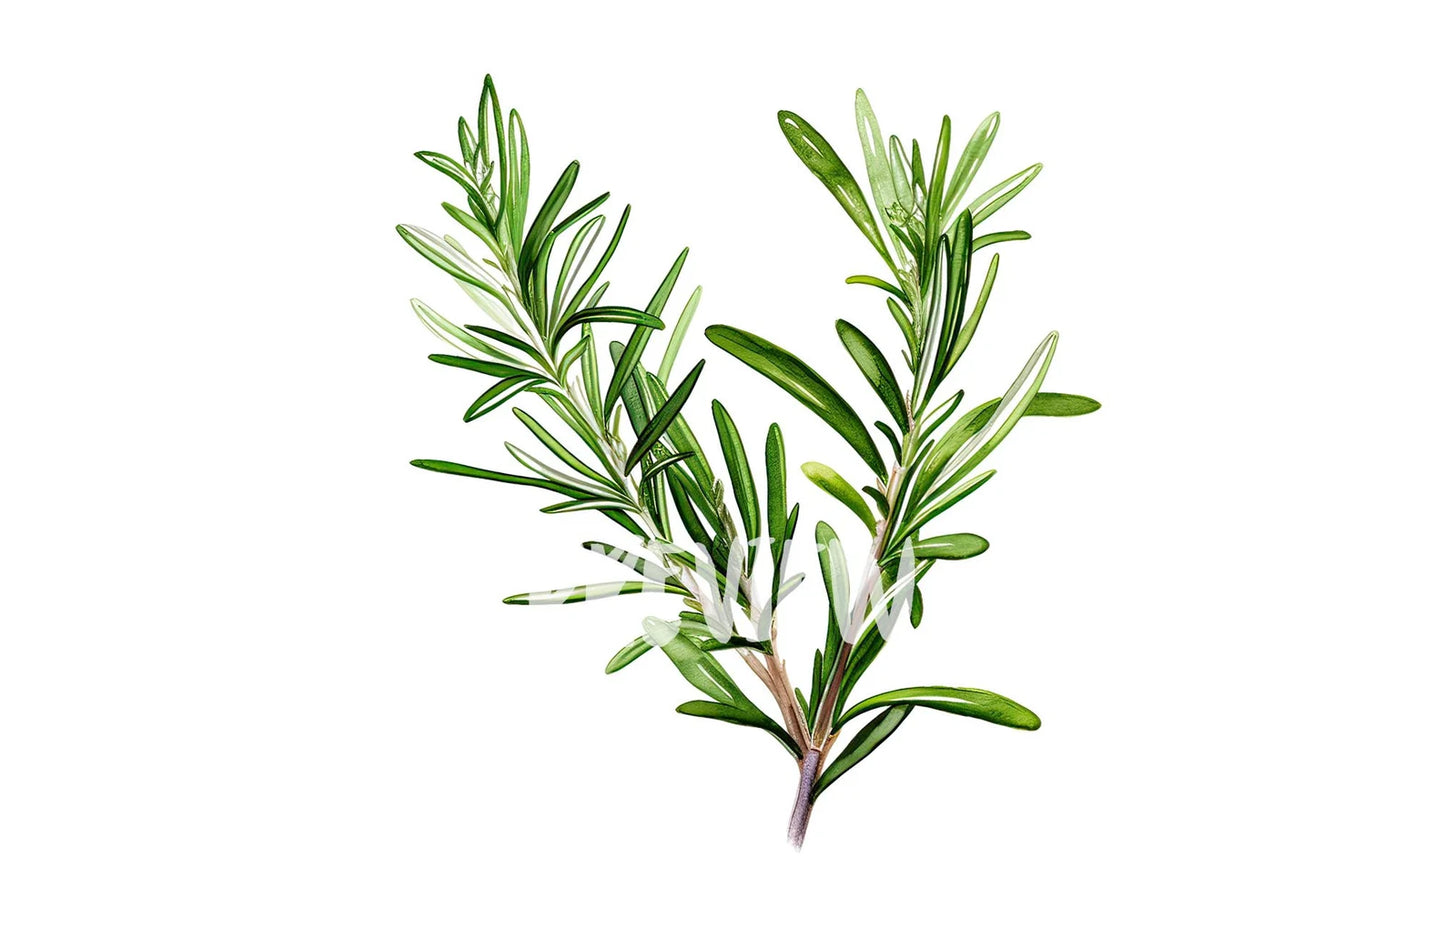 Watercolor Rosemary clipart